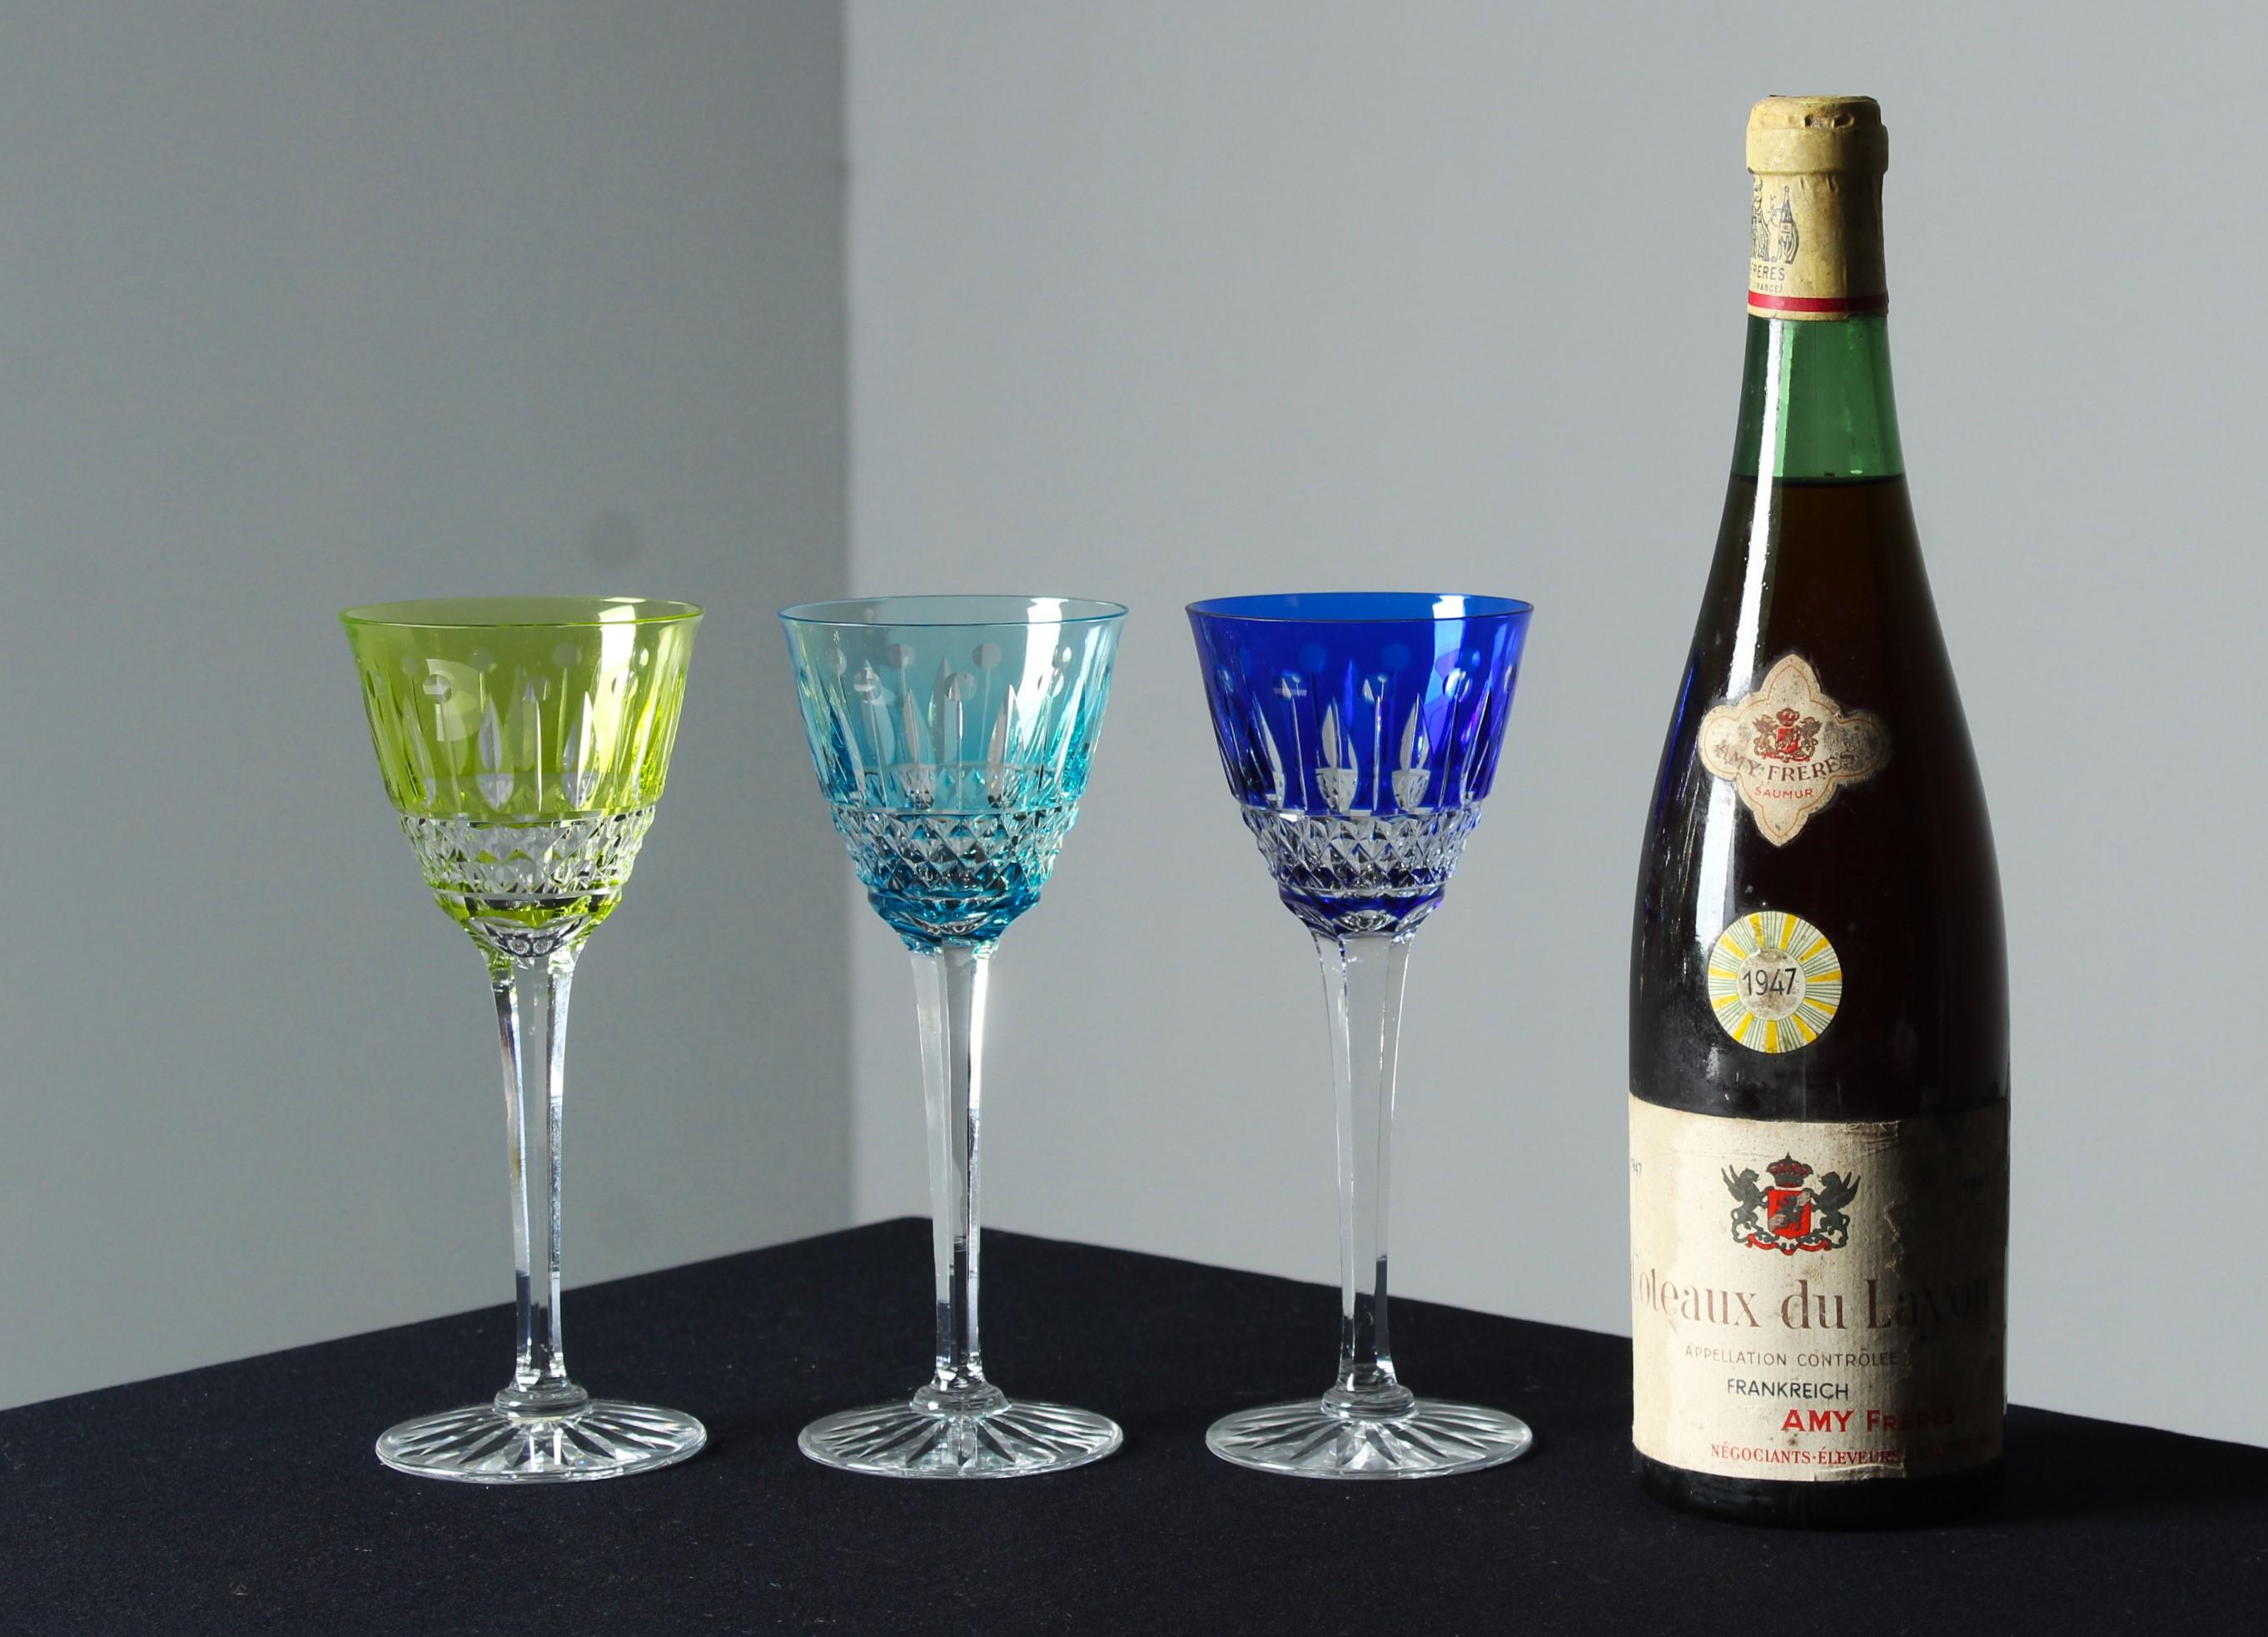 A beautiful set of three aperitif glasses in green, turqouise and blue.

In 19th century France, the art of glassmaking experienced a renaissance inspired by the rich history and heritage of ancient techniques. Antique glasses from this era are not